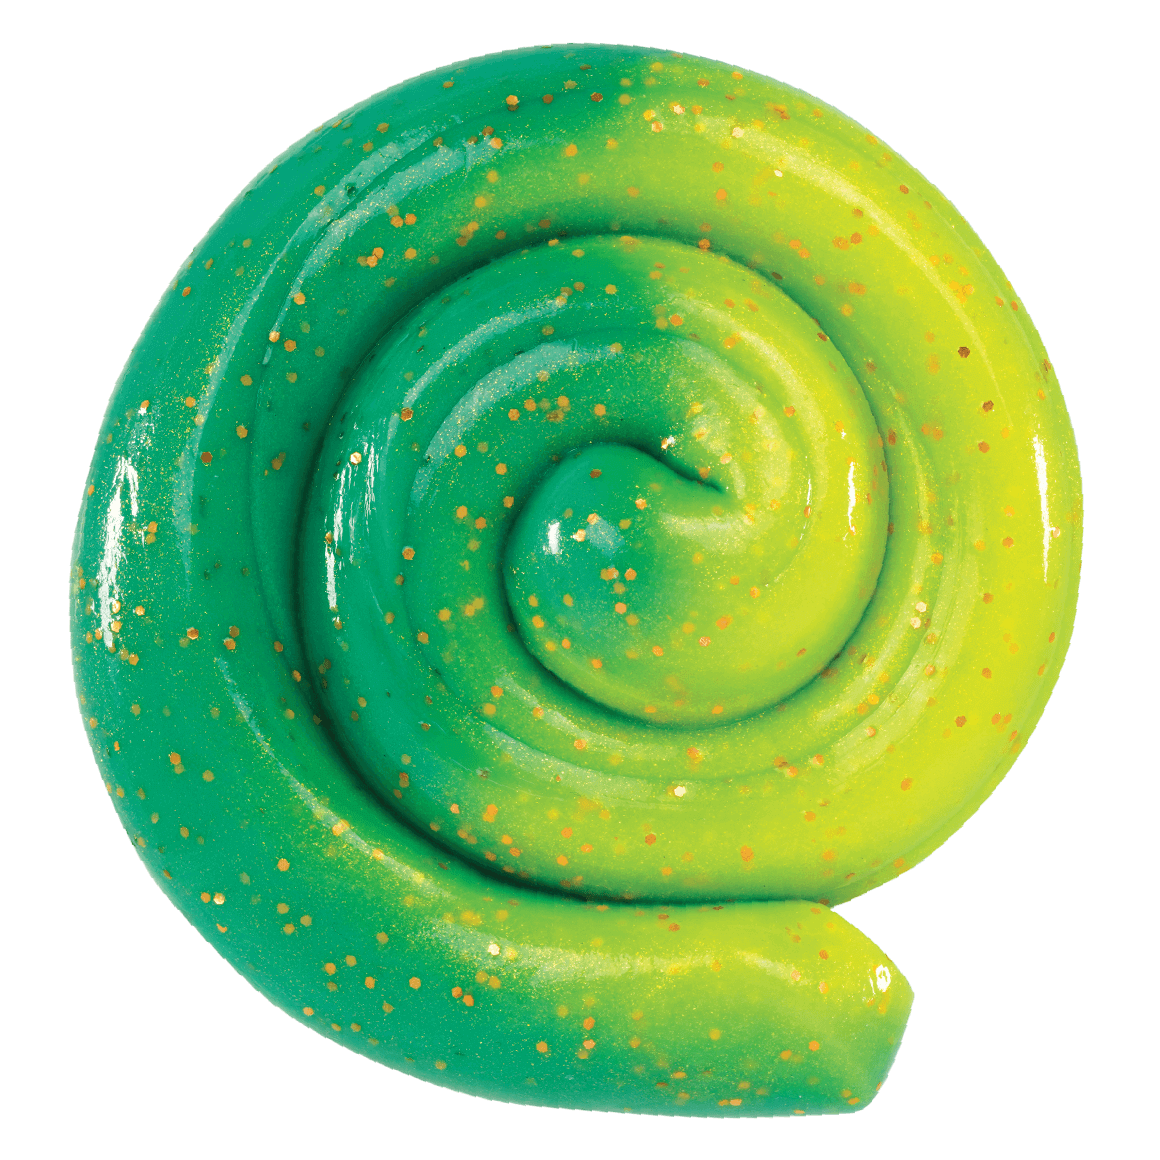 Magic Dragon Hypercolor Putty, Crazy Aarons Thinking Putty, eco-friendly Toys, Mountain Kids Toys